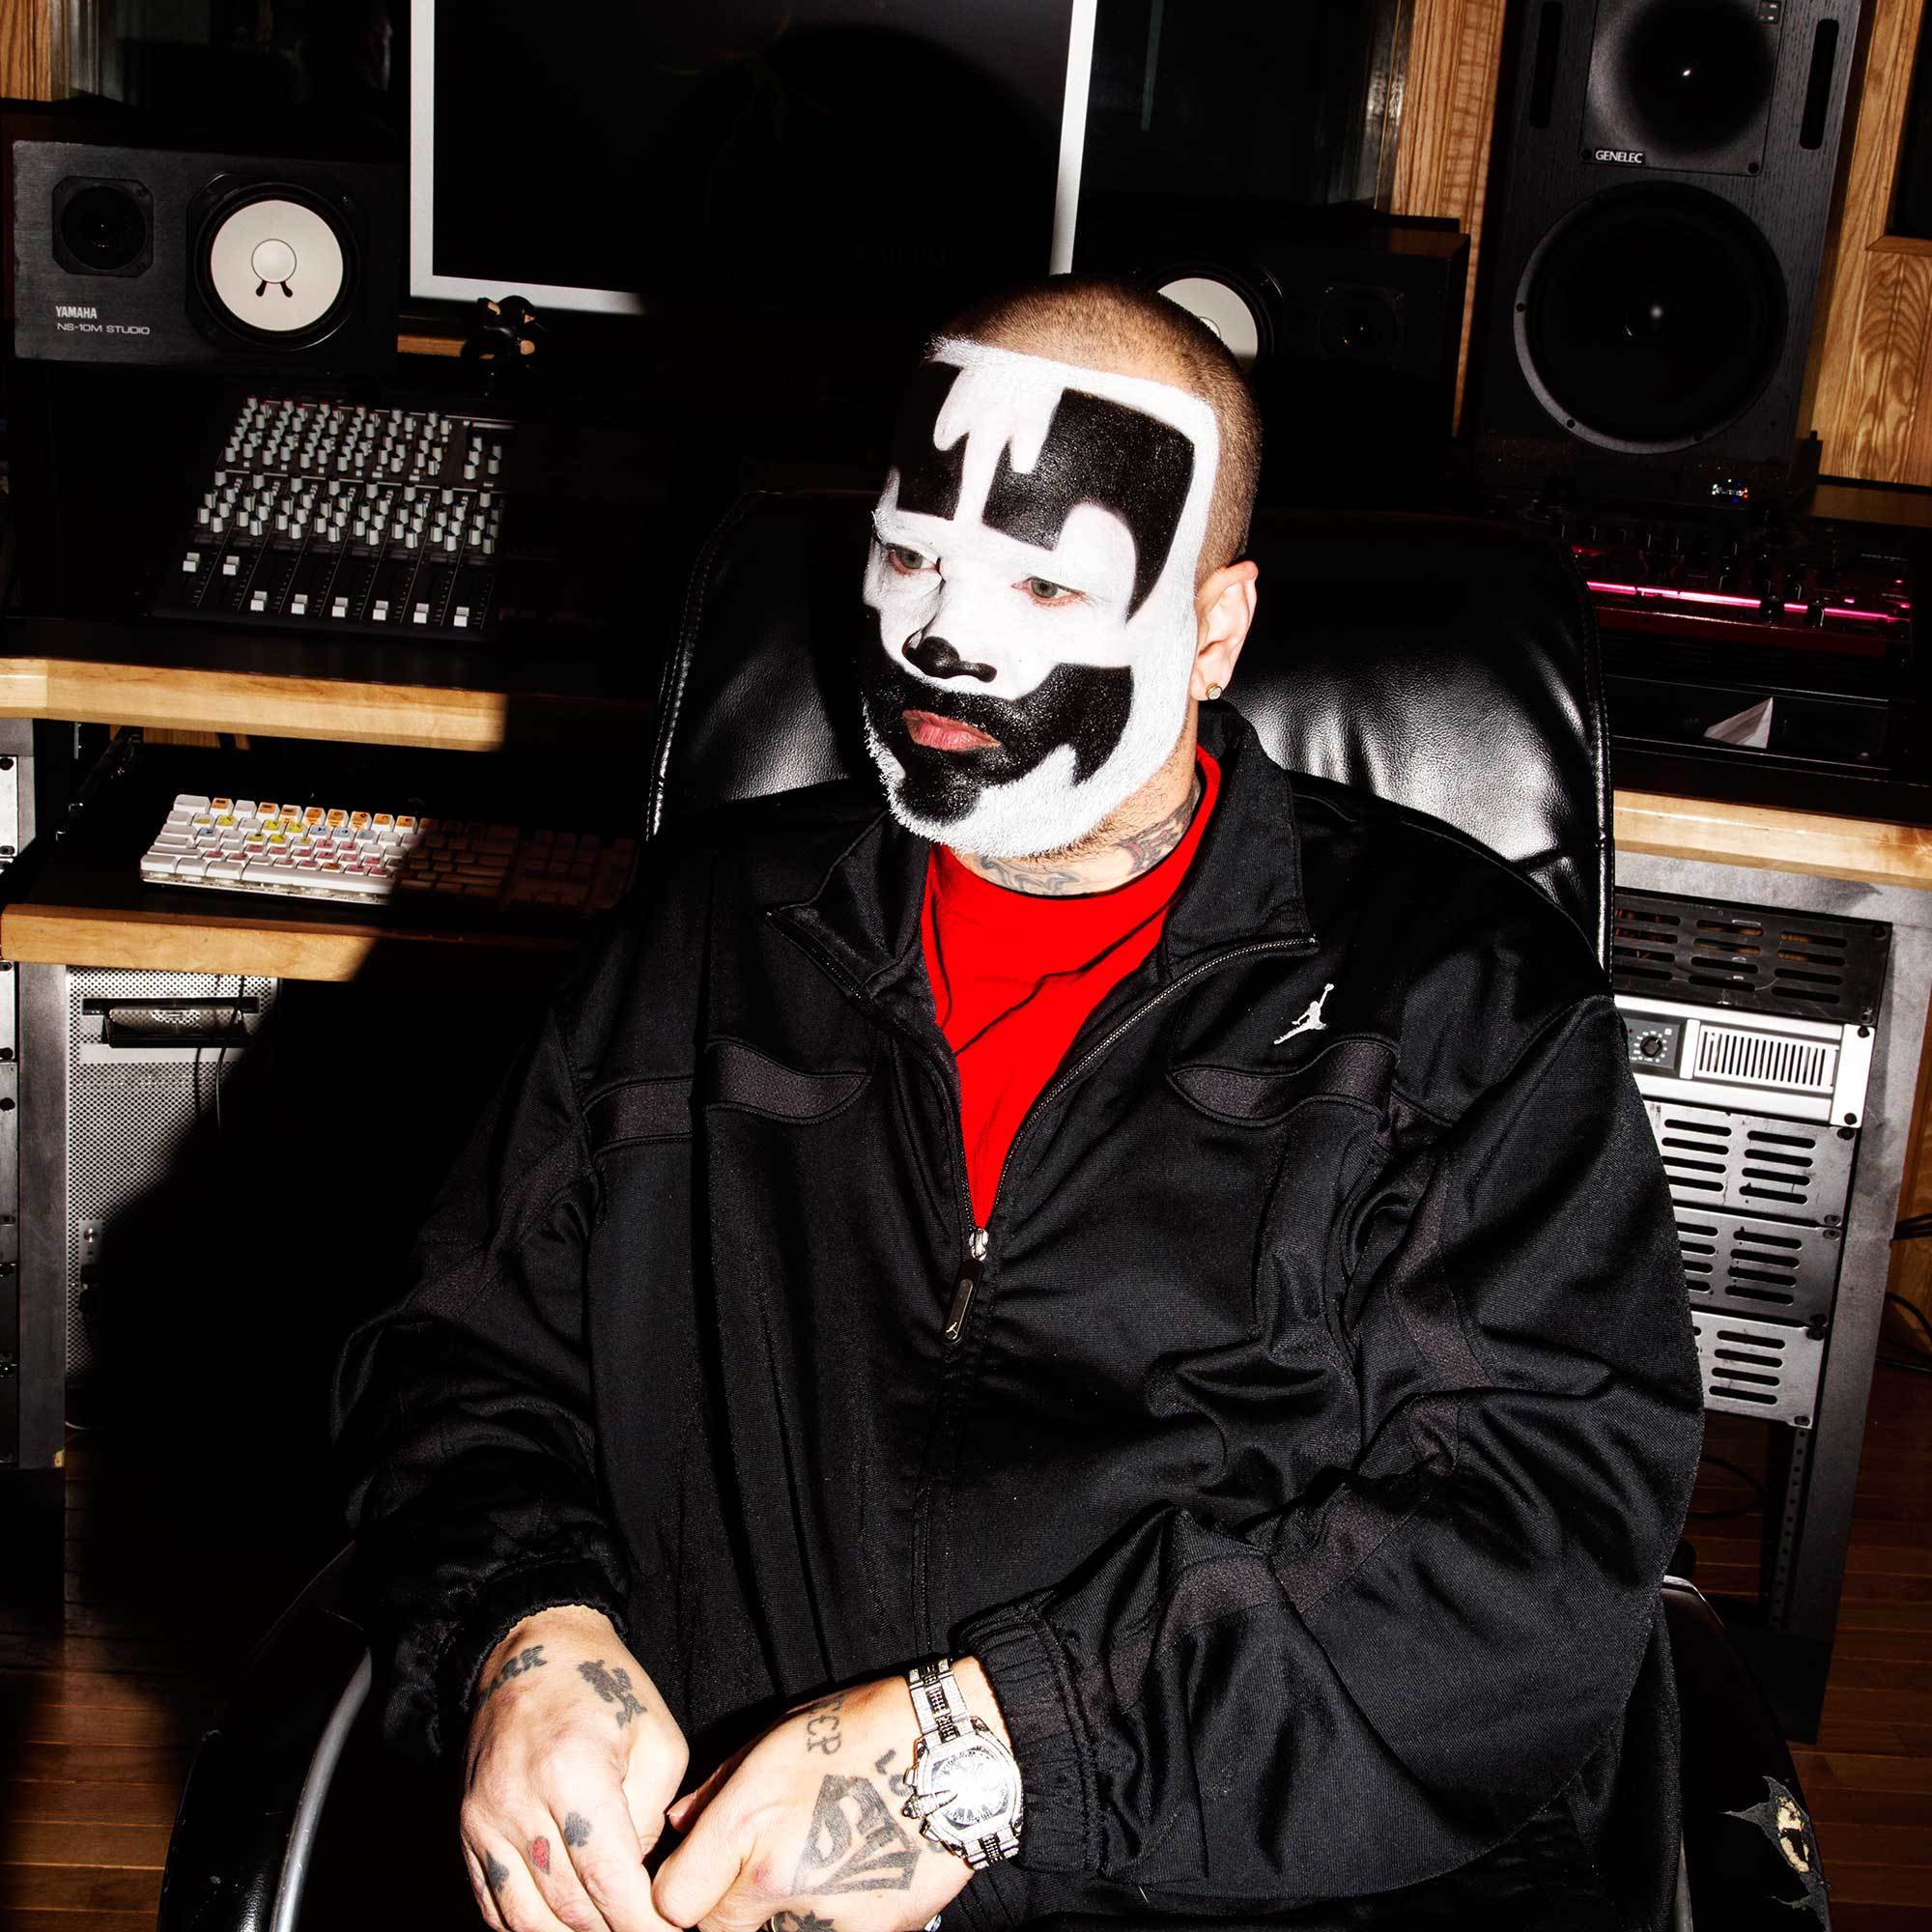 shaggy 2 dope young. shaggy-2-dope-young. 